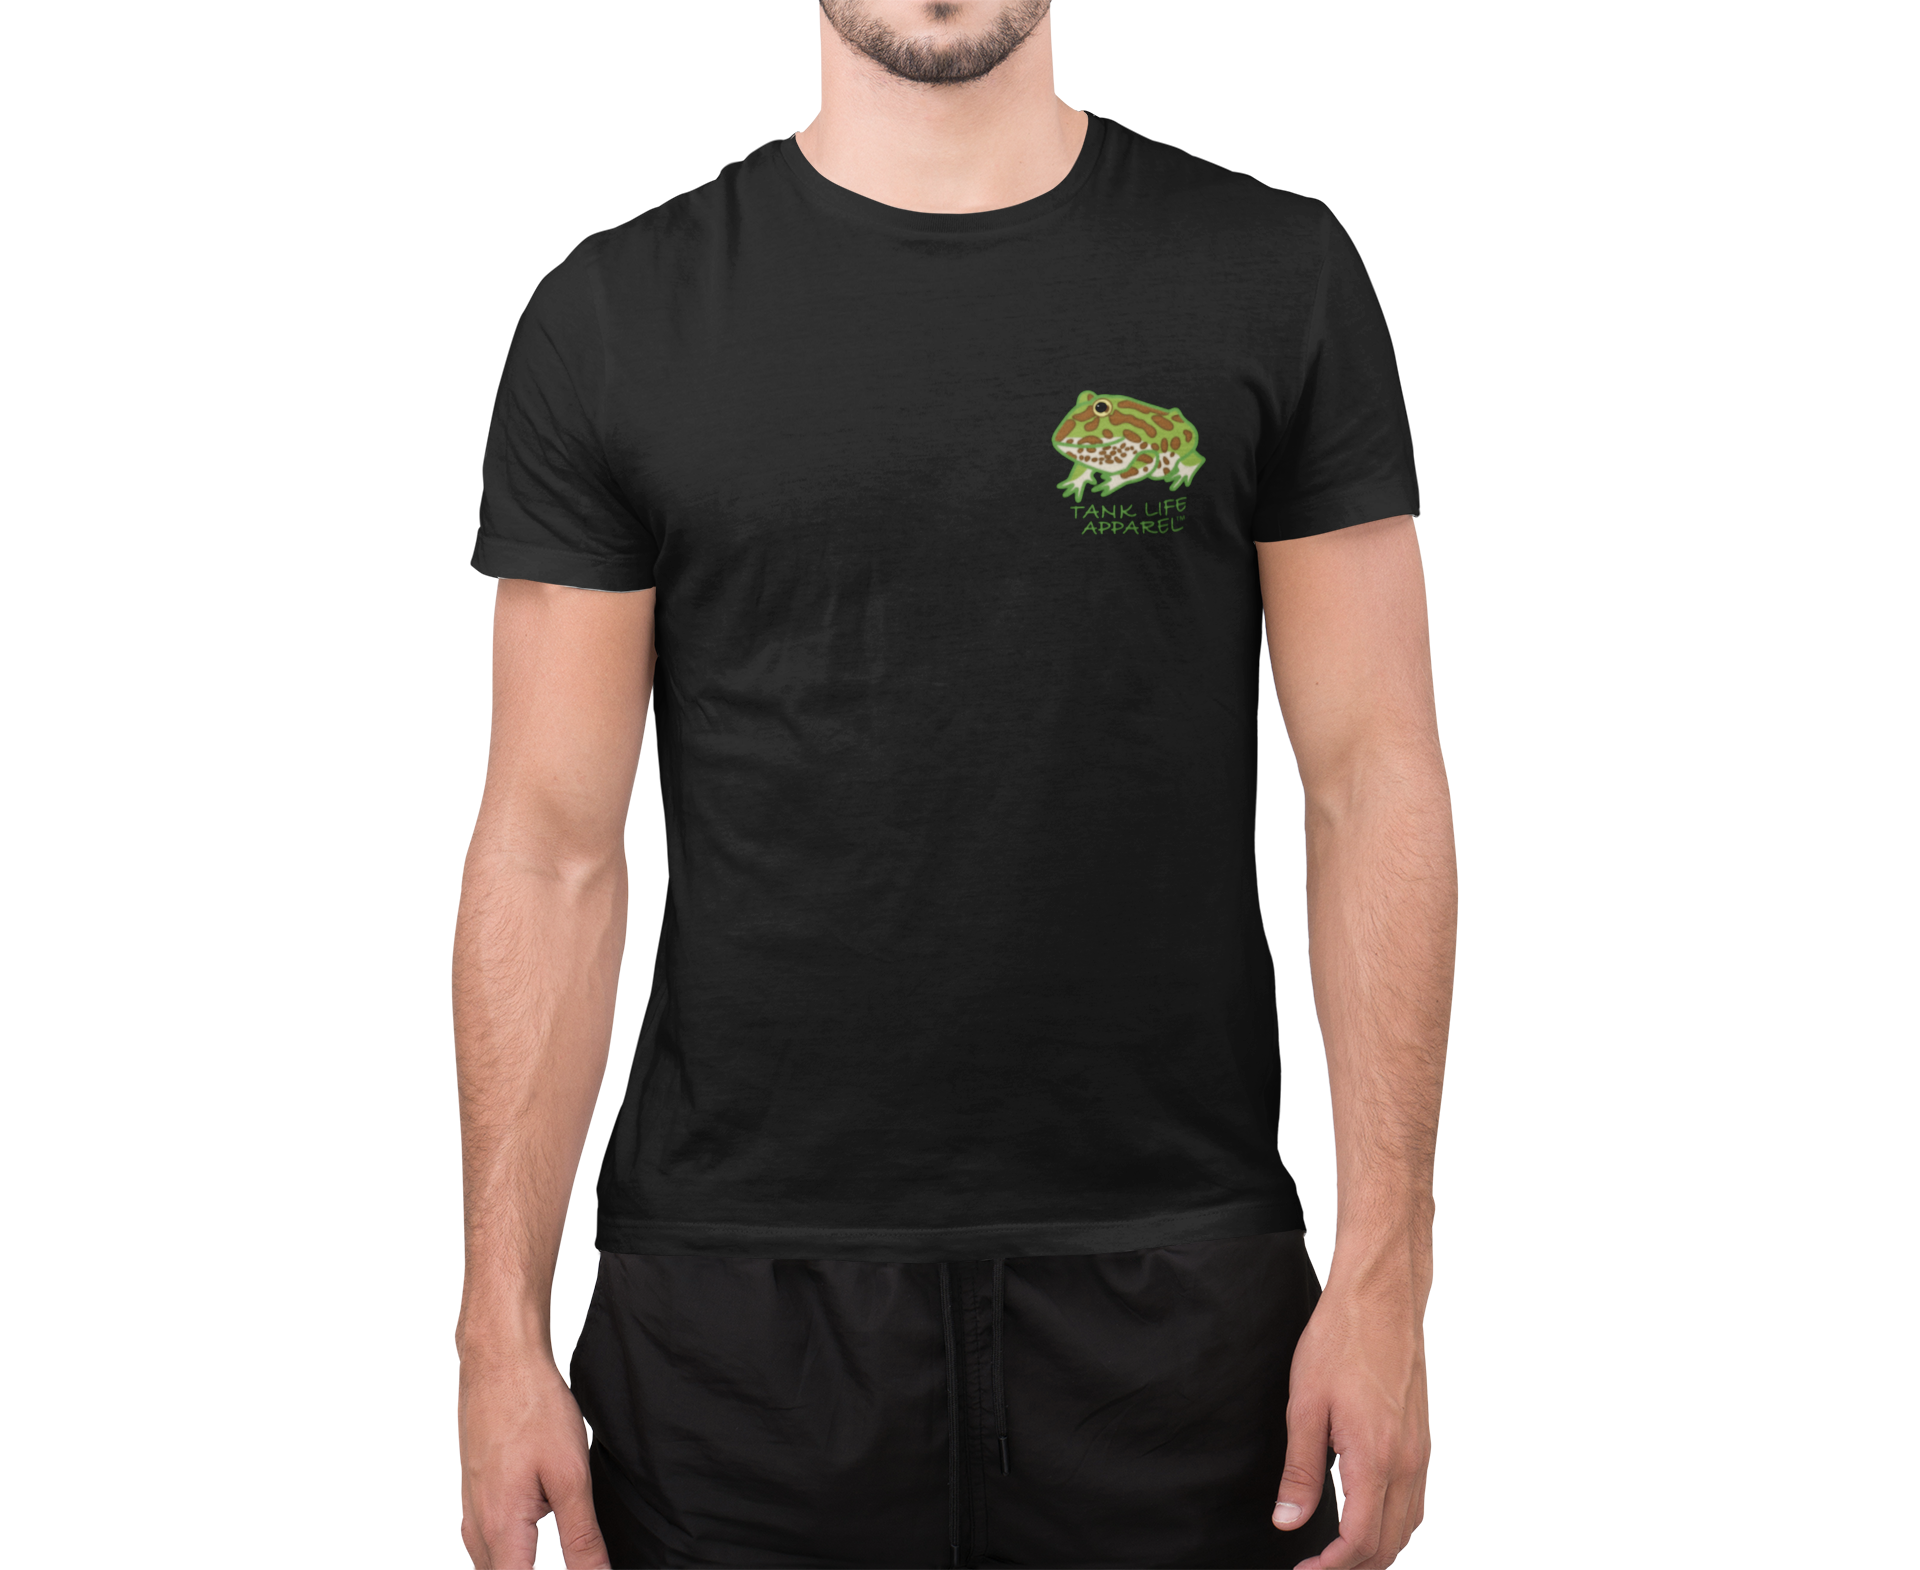 The Tank Life Apparel green pacman frog design on a classic tee with our custom TLA sleeve label. Green frog with brown spots and dots on shirt.